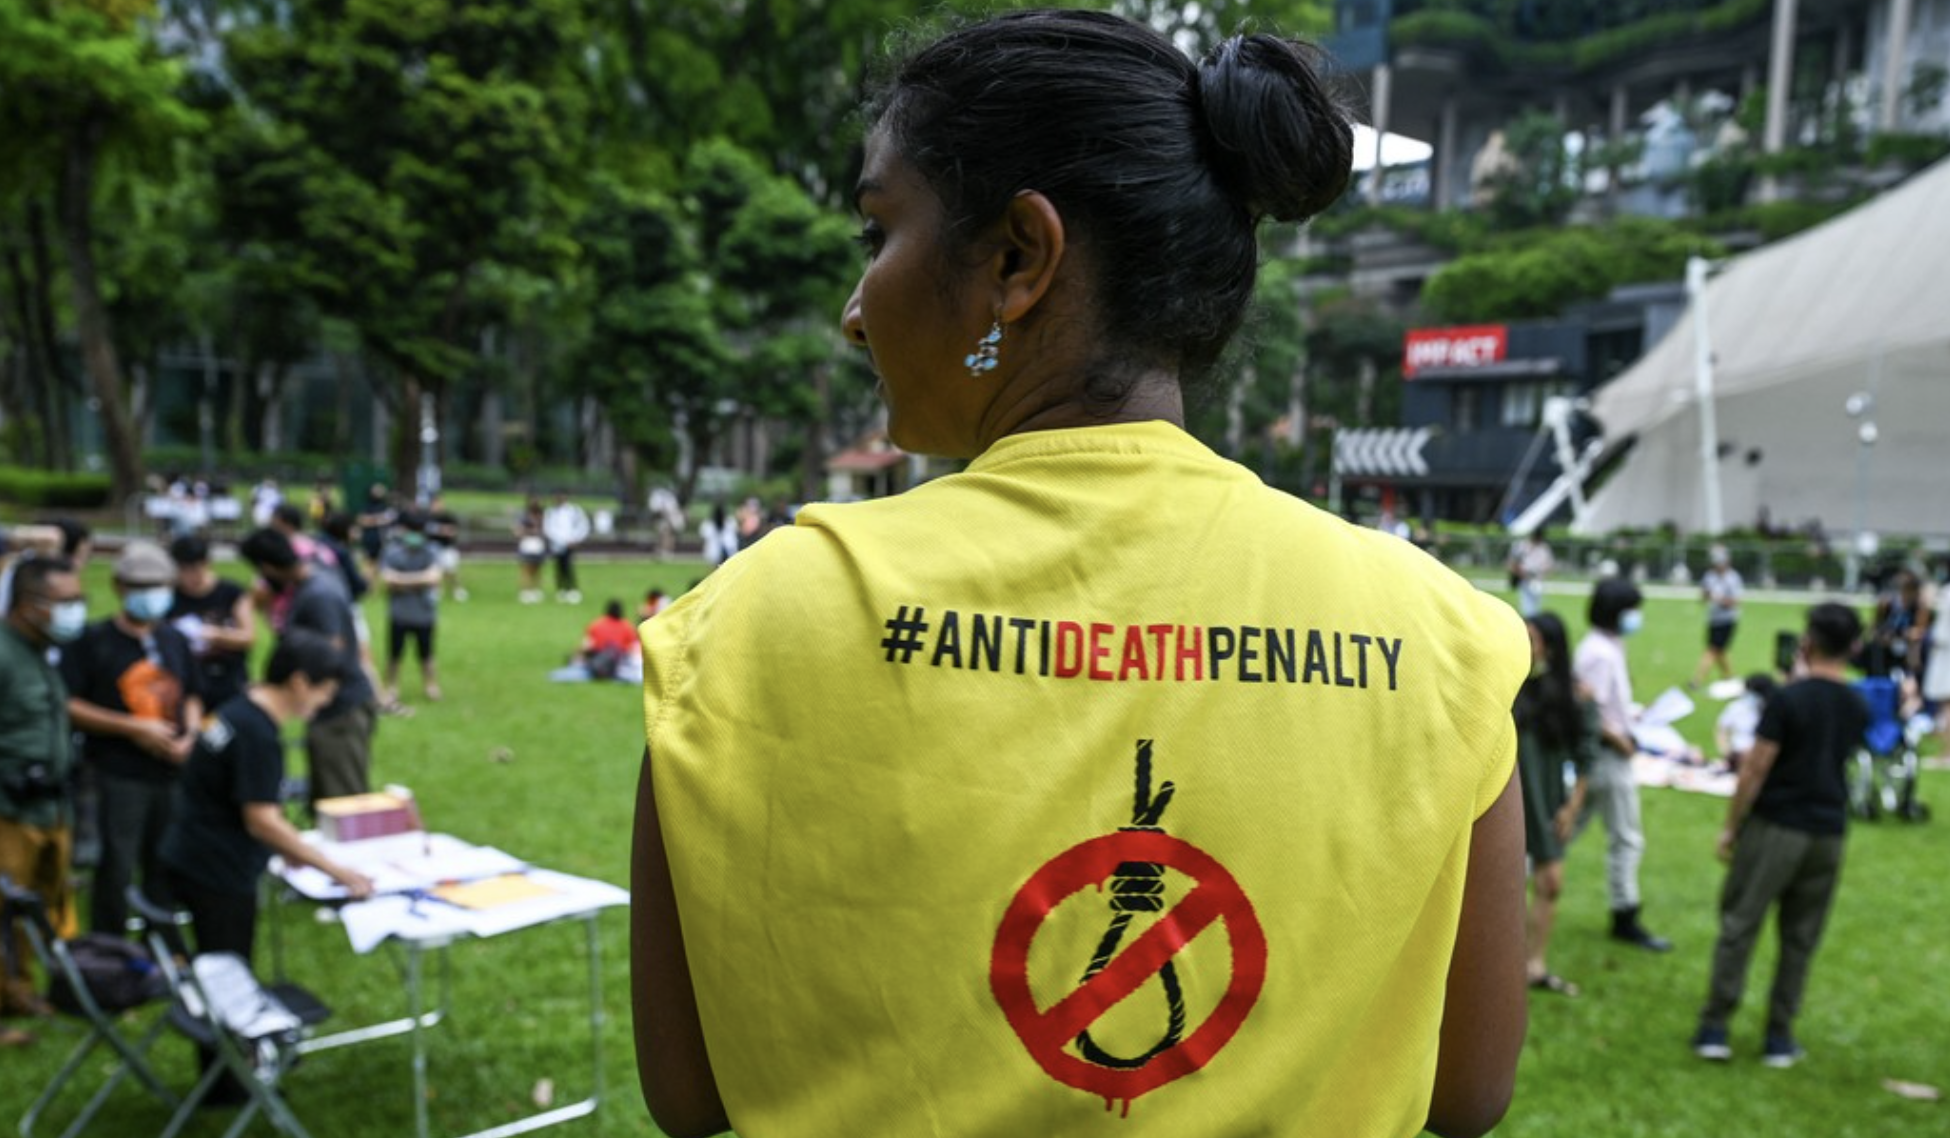 An activist at a protest against the death penalty at Speakers’ Corner in Singapore on 3 April, 2022.